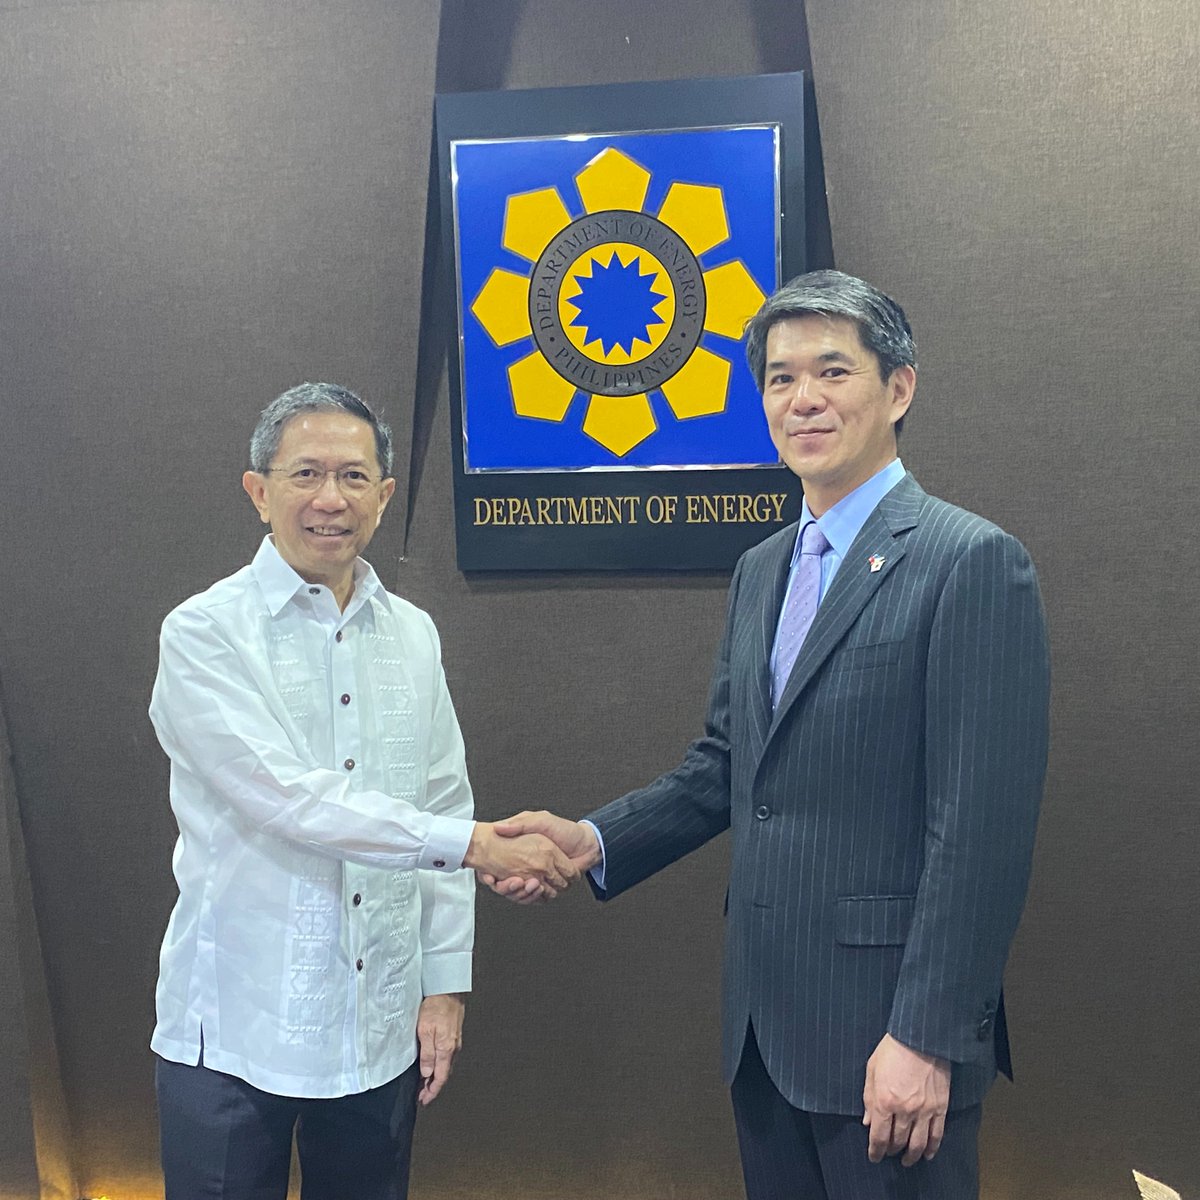 Just concluded a productive meeting today with the DOE Secretary to discuss bilateral collaborations in the energy sector. ⚡♻️ Looking forward to fostering mutual growth through sharing 🇯🇵 ‘s technological expertise and sustainable energy initiatives for a future-proof 🇵🇭🤝🍃